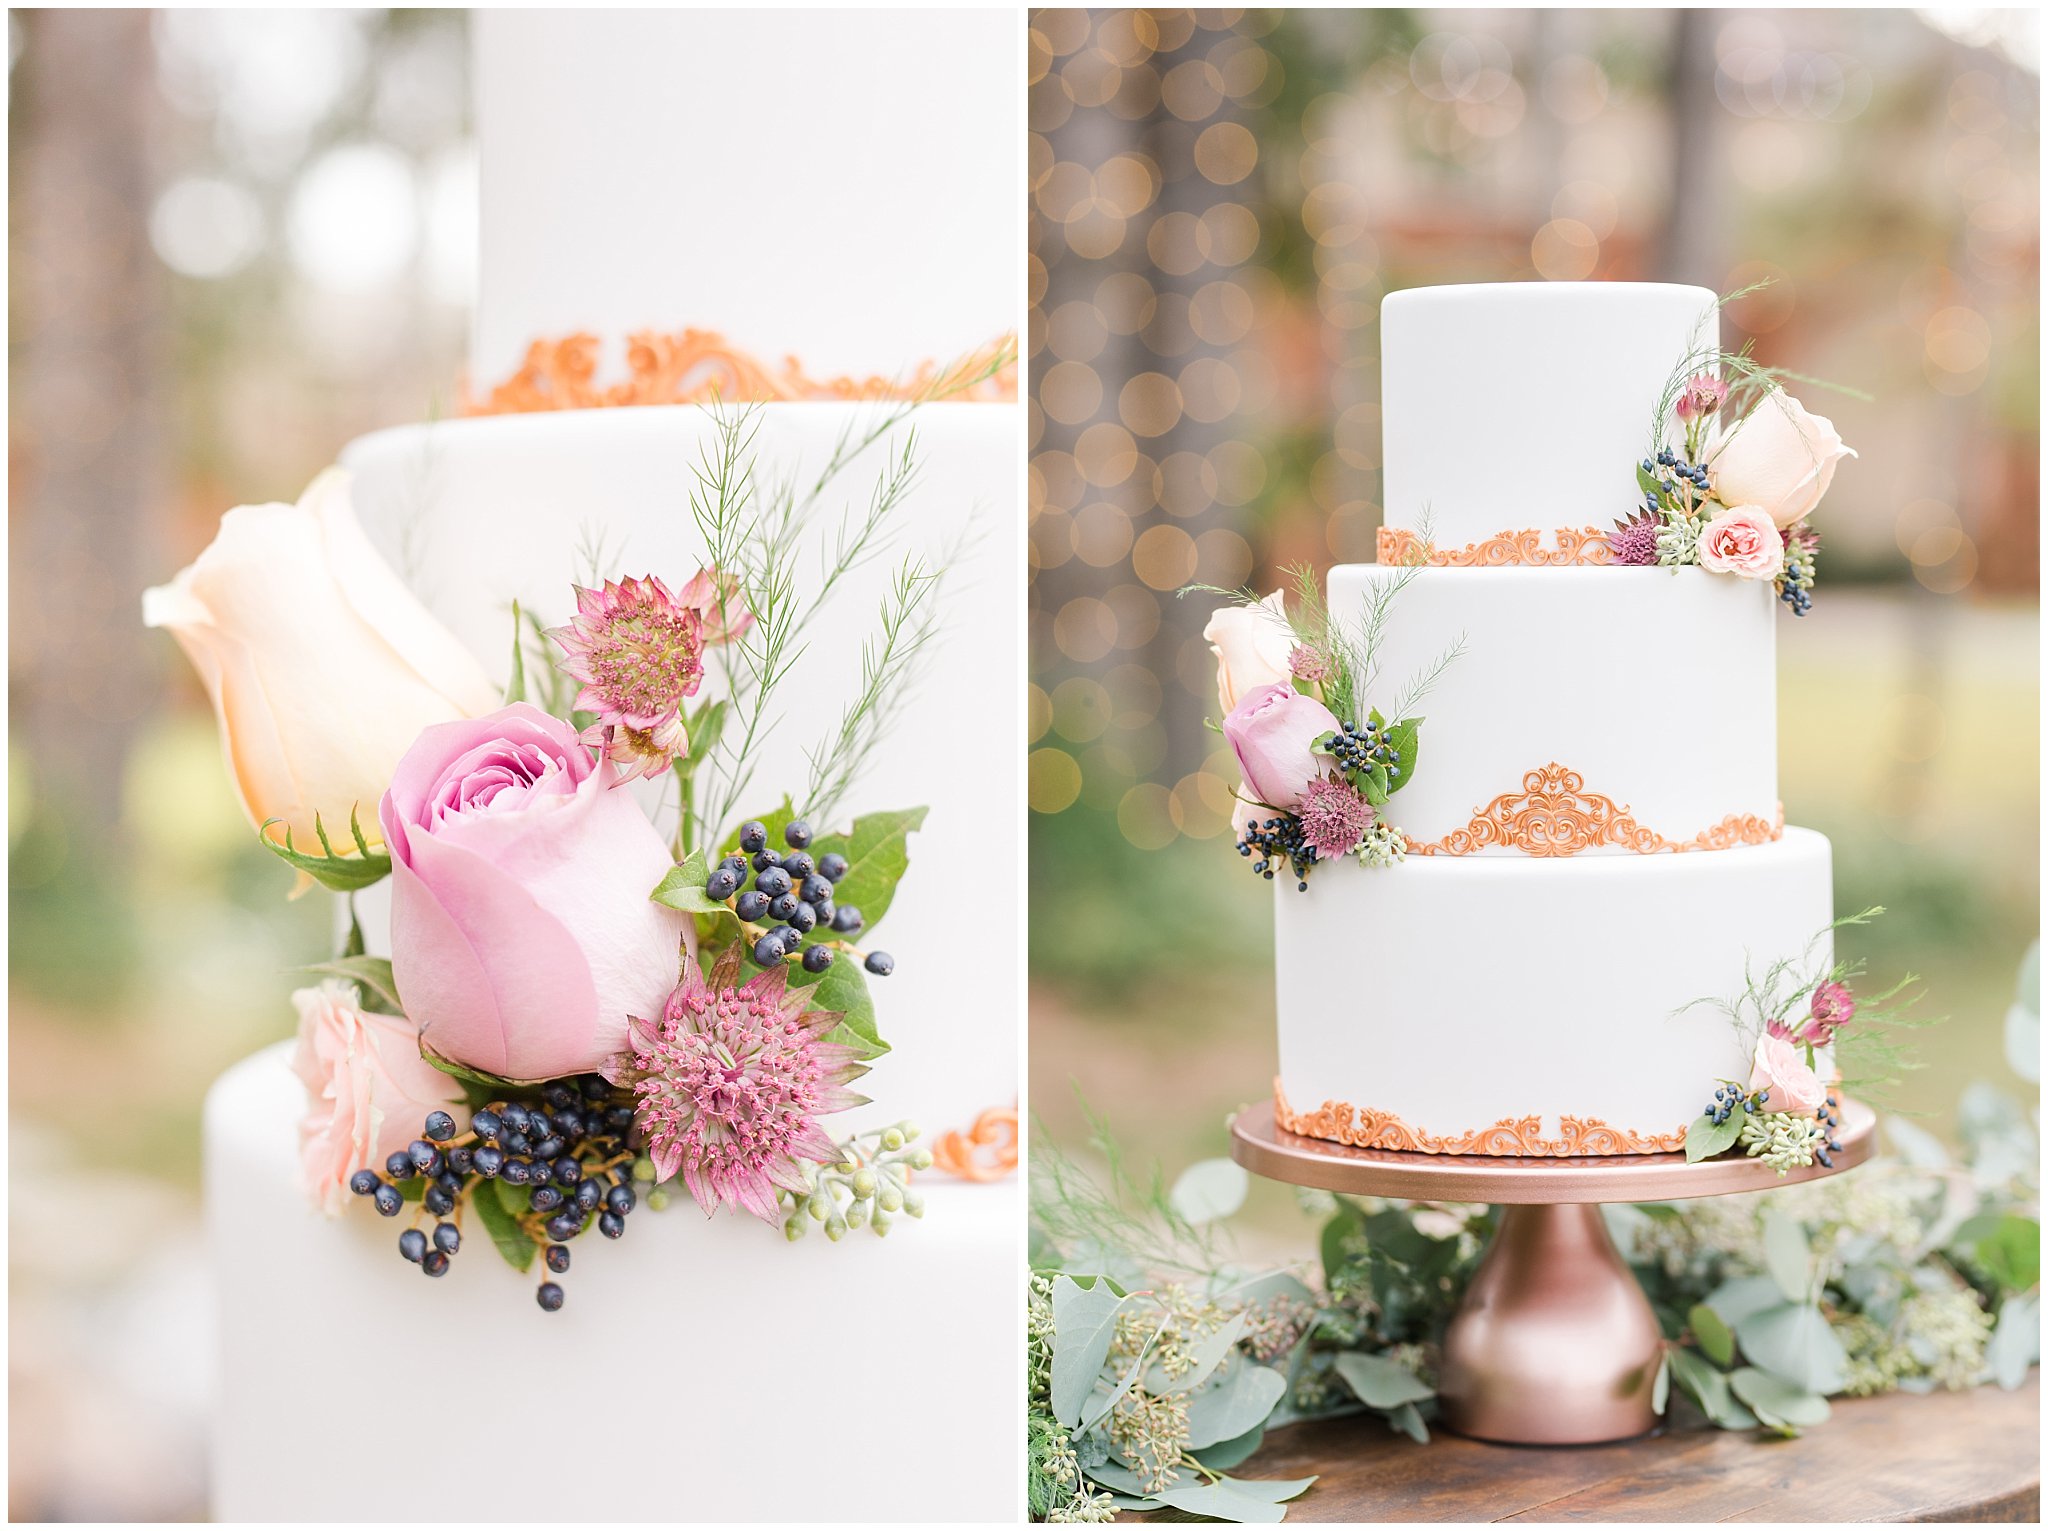 White and copper floral wedding cake | Top Utah Wedding and Couples Photos 2019 | Jessie and Dallin Photography